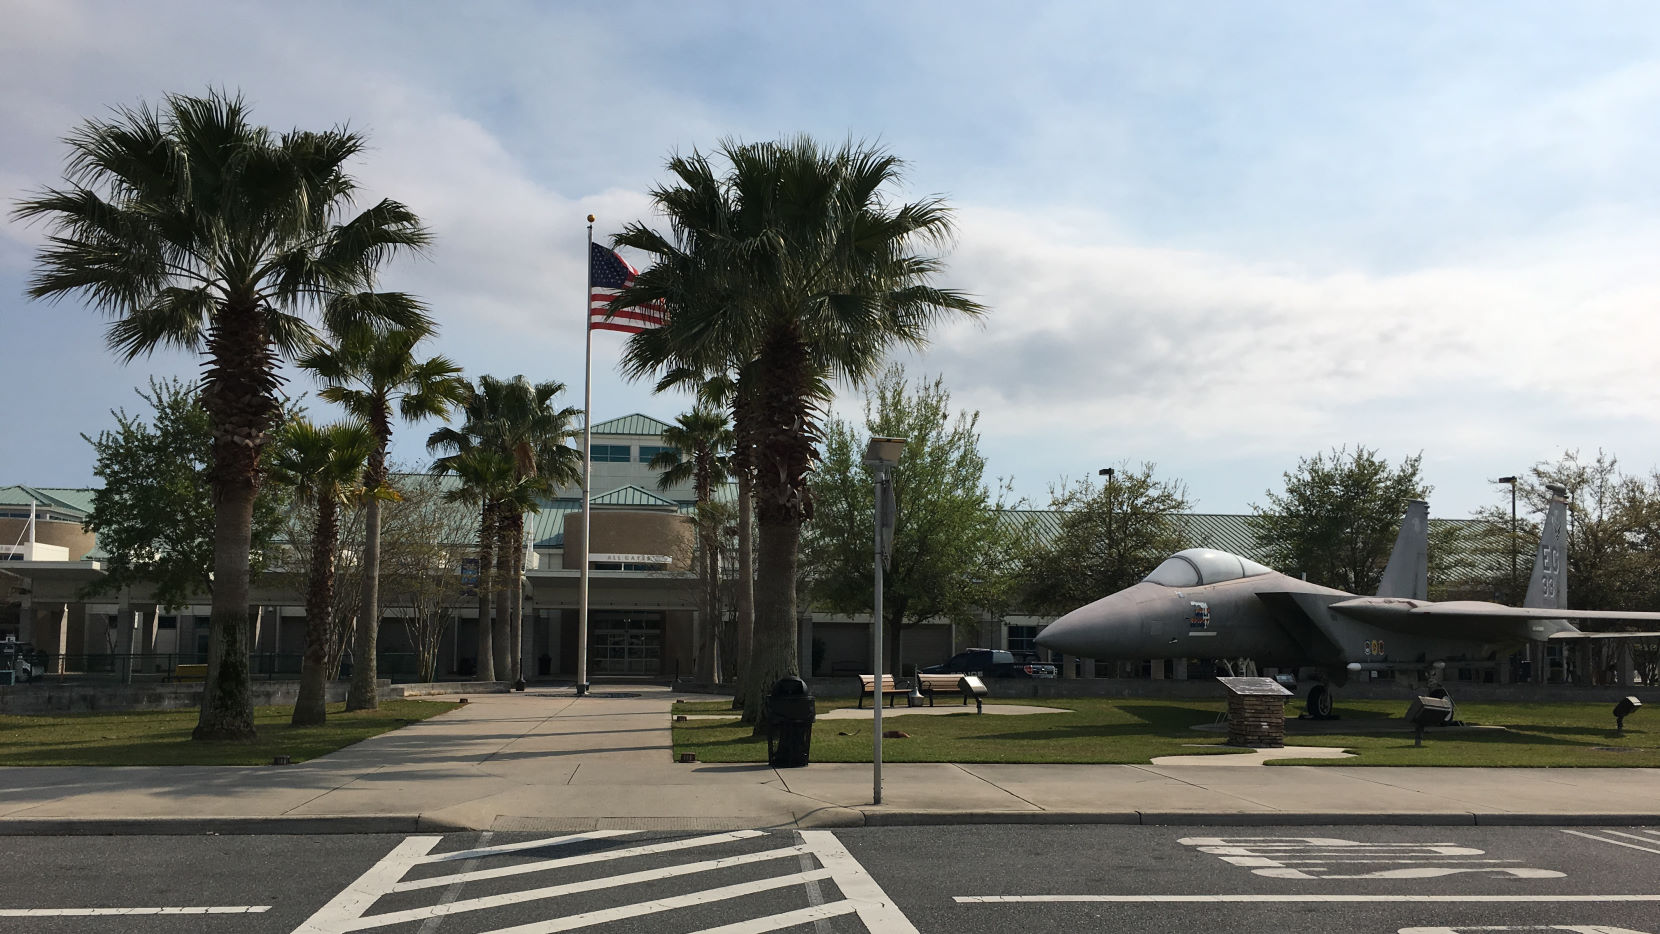 An F-15 on display in front of the VPS terminal building.